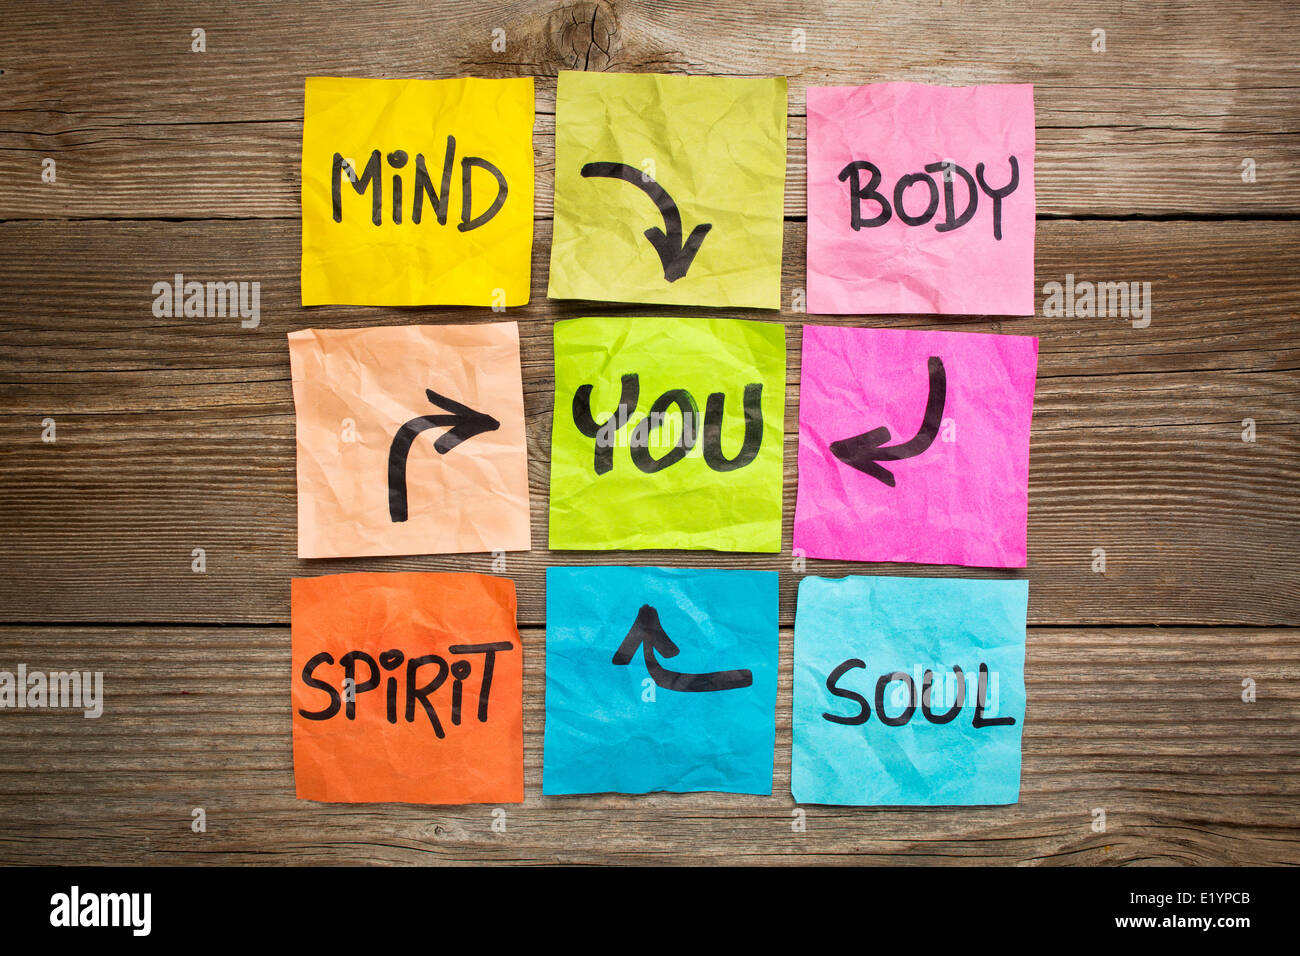 mind, body, spirit, soul and you - balance or wellbeing concept - handwriting on colorful sticky notes against grained wood Stock Photo